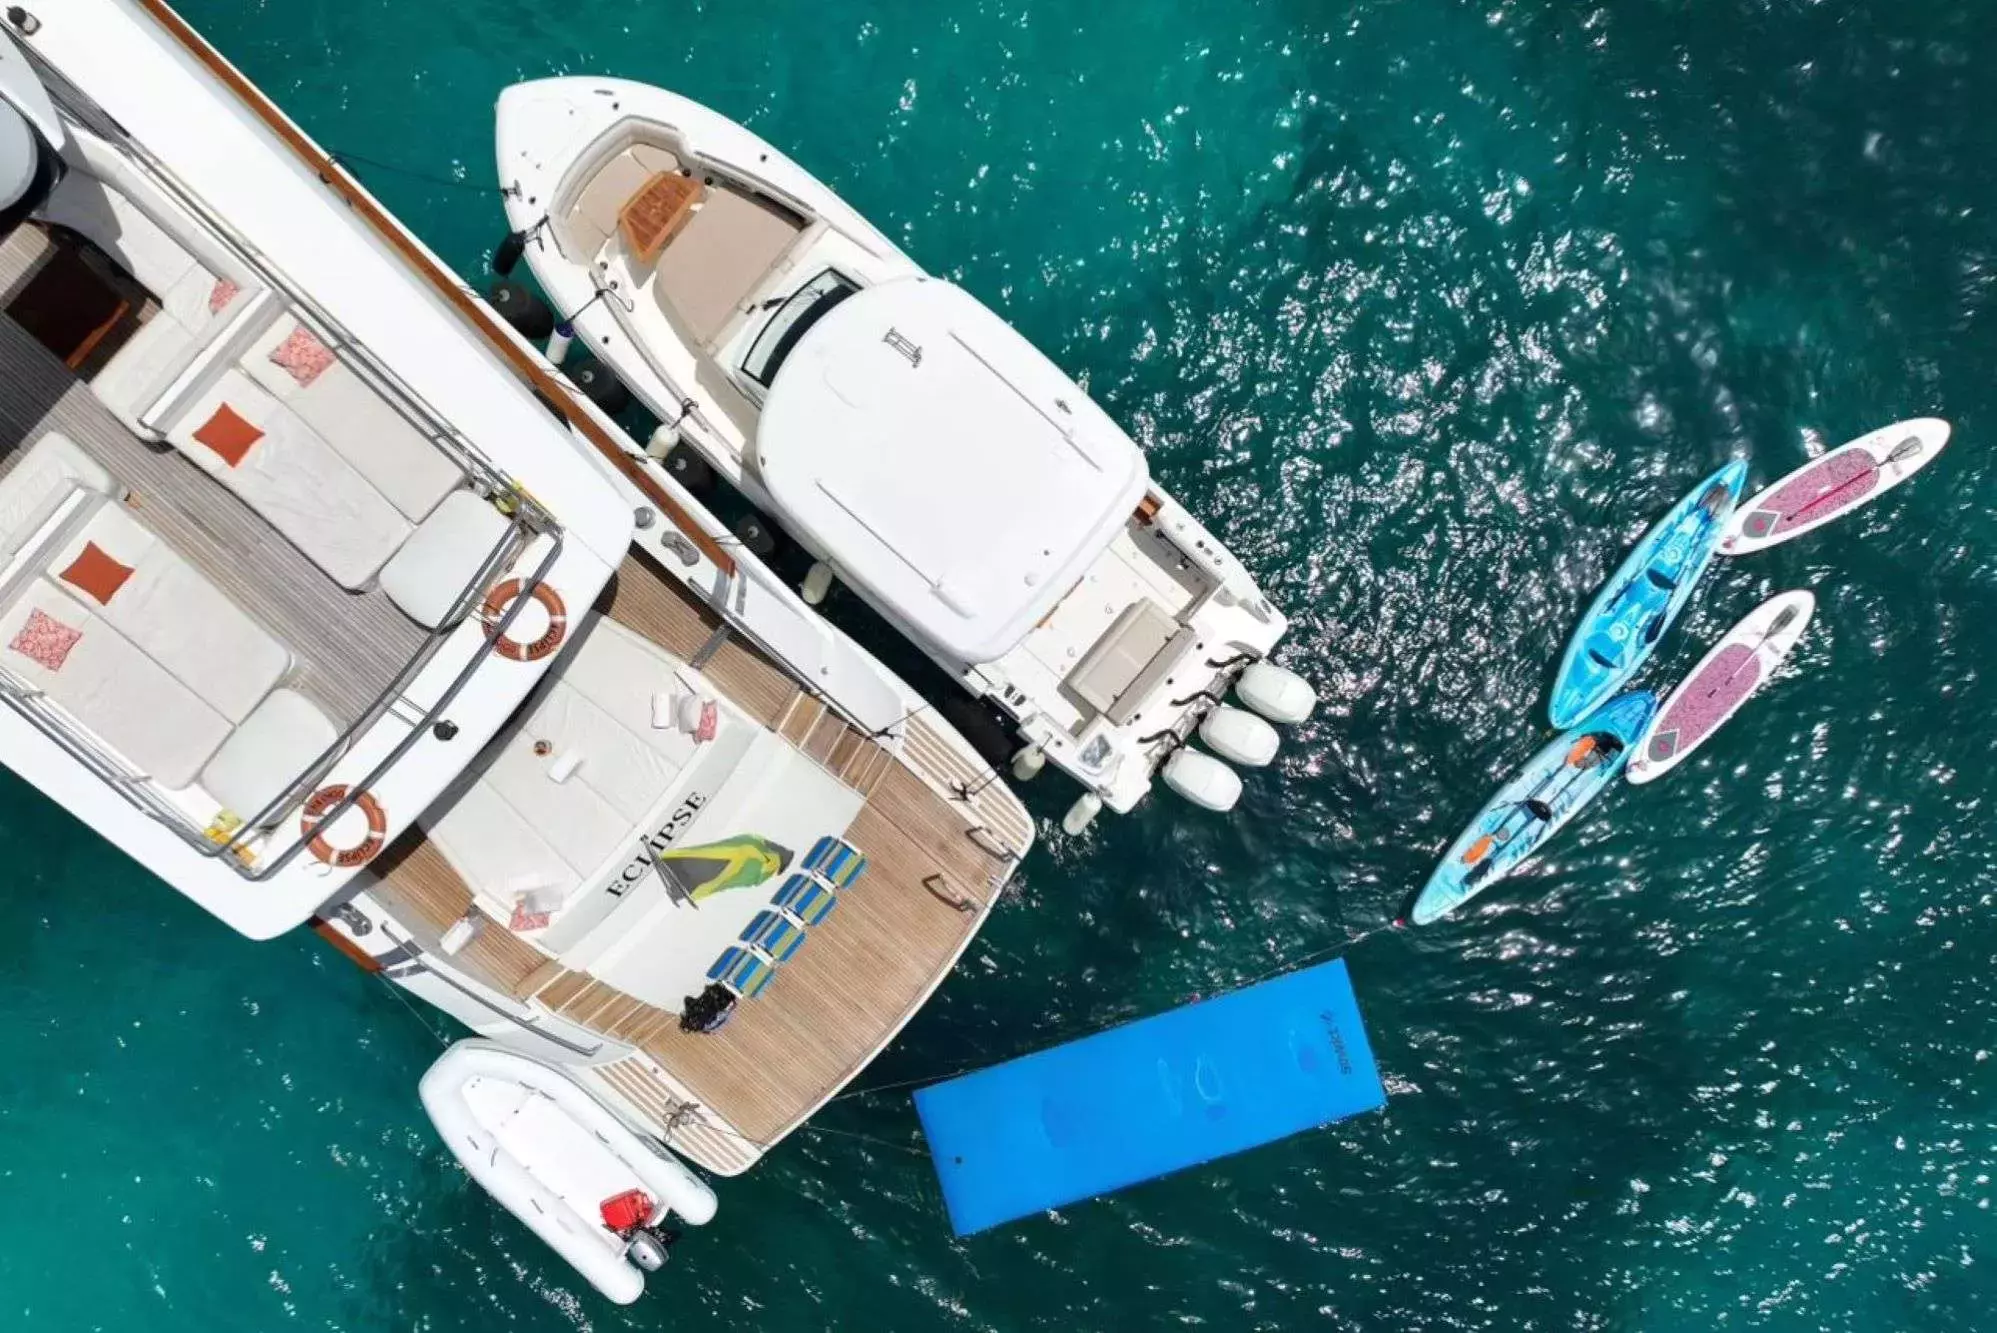 Eclipse by Couach - Top rates for a Charter of a private Superyacht in Anguilla